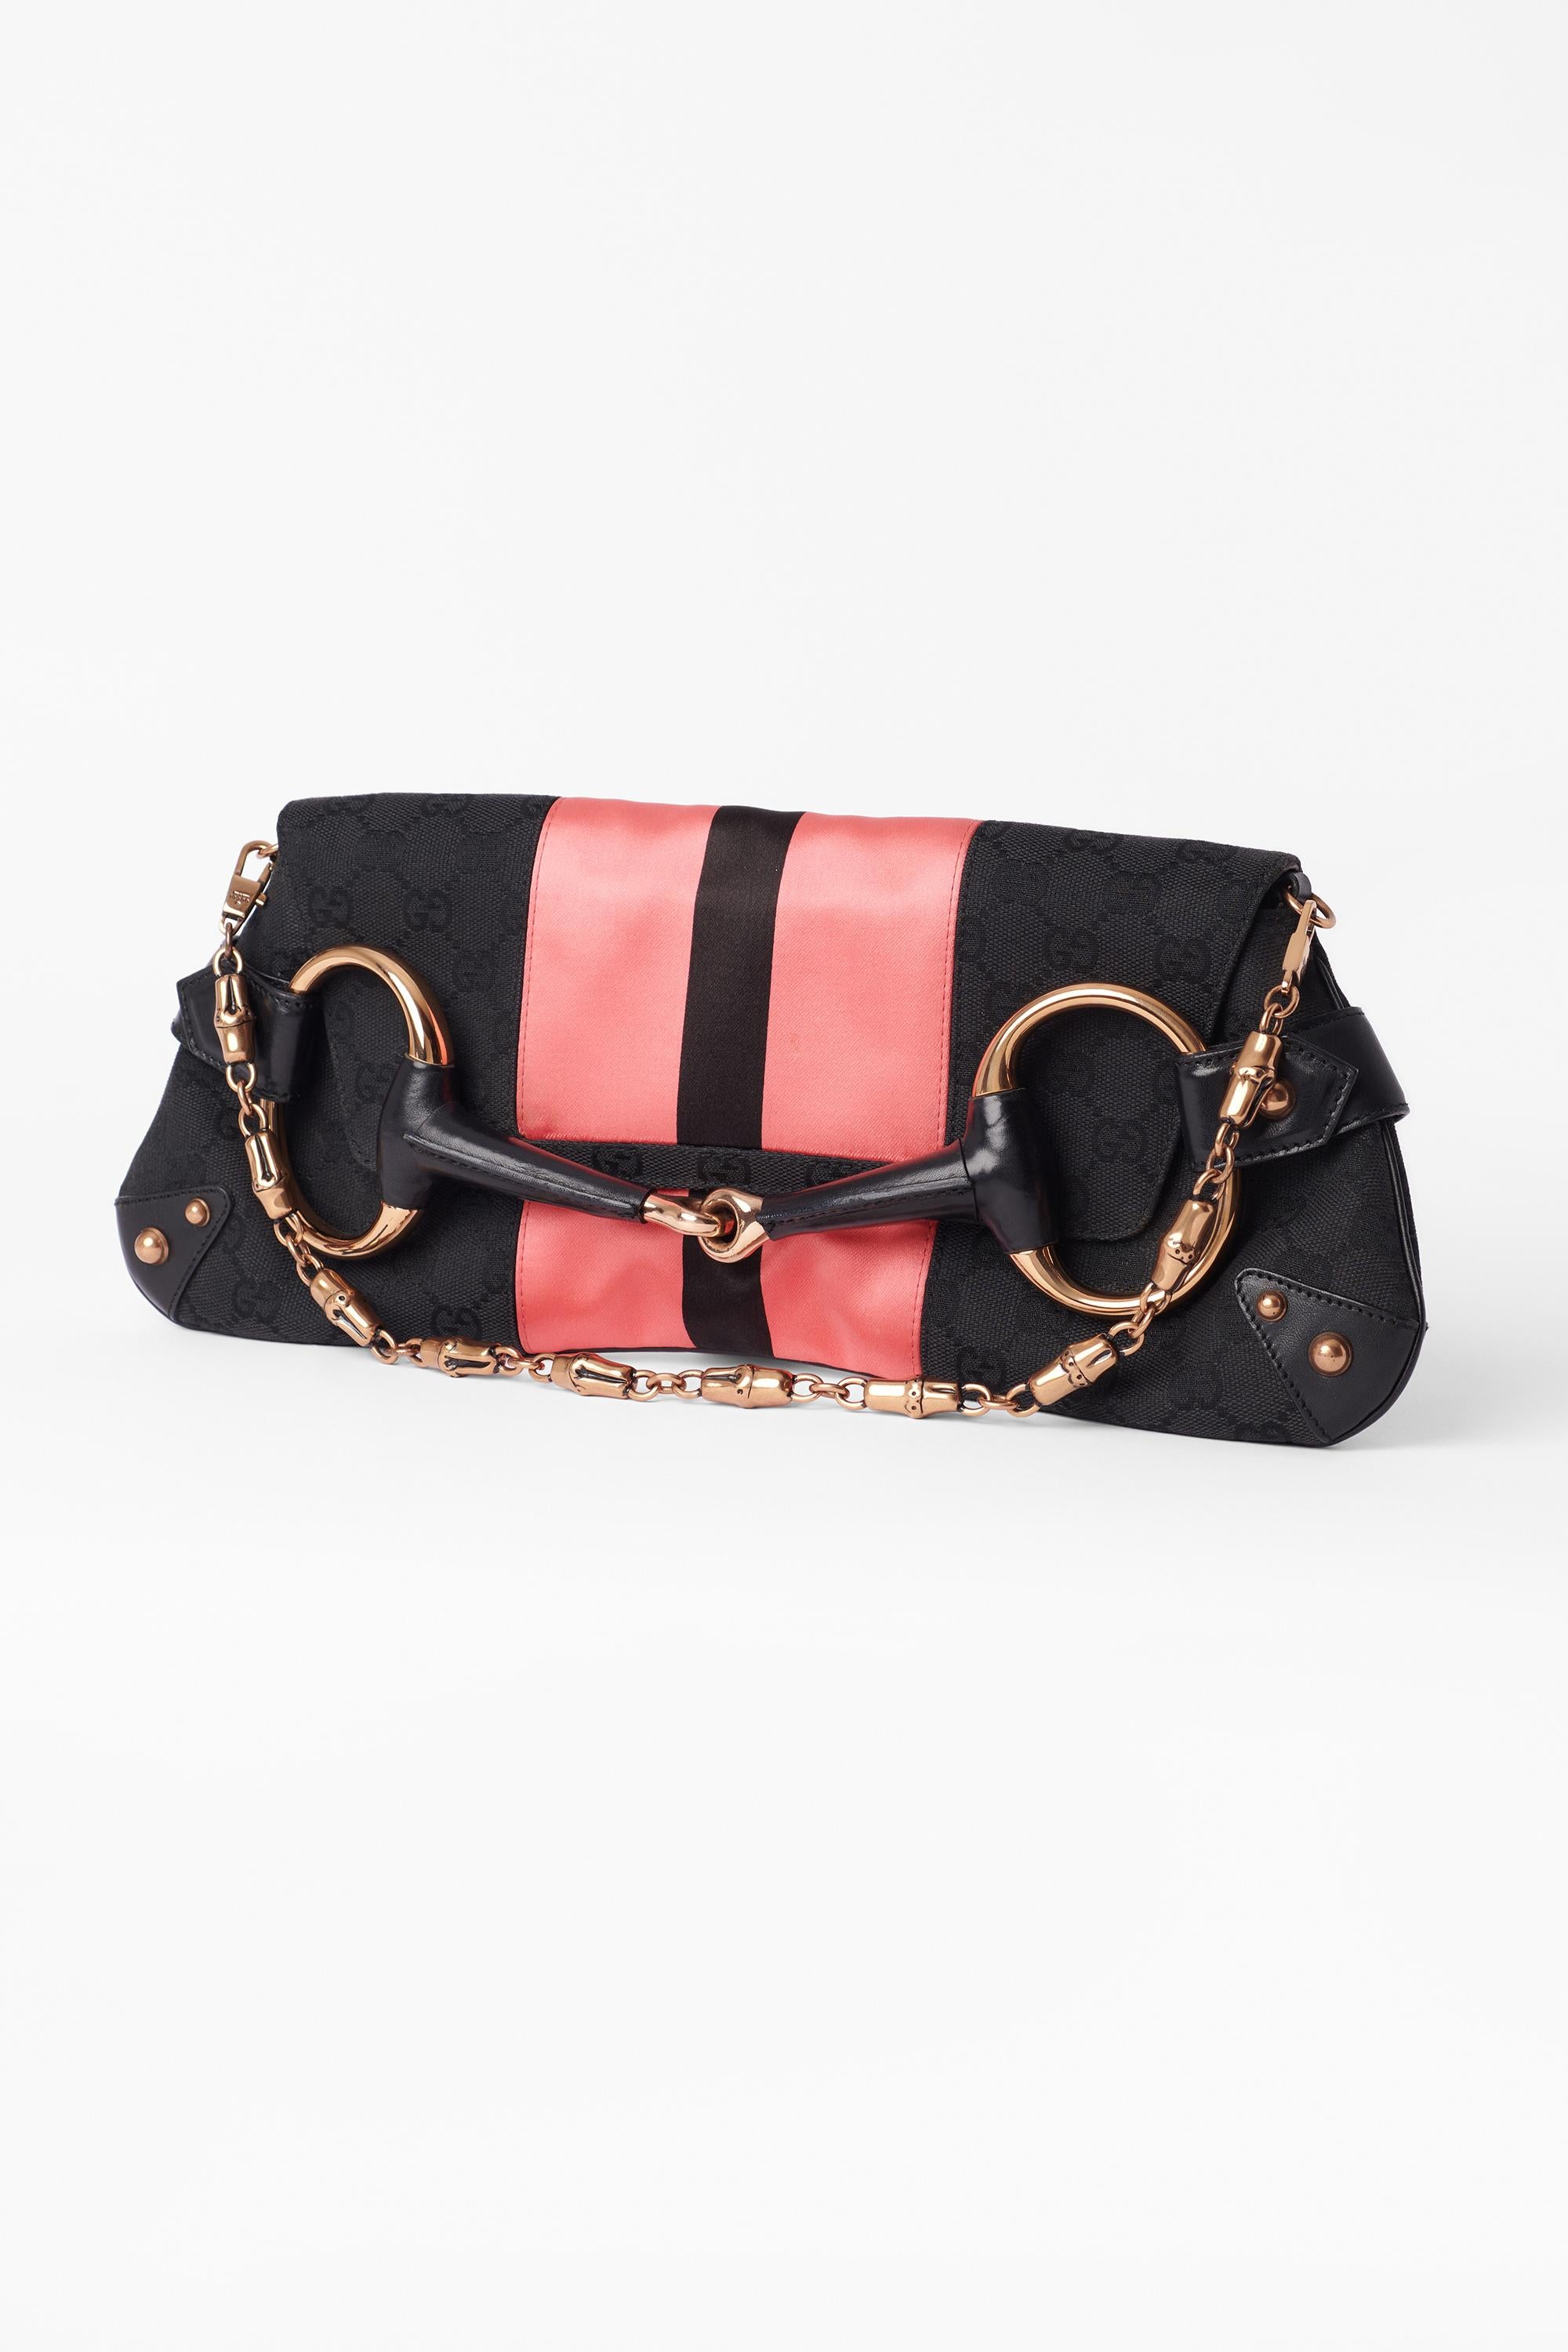 Tom Ford S/S 2004 black and pink GG monogram horsebit clutch, collectors item. Features signature horsebit detailing, black GG canvas and pink satin, detachable chain strap with Gucci branded magnetic closure and interior pocket. In excellent